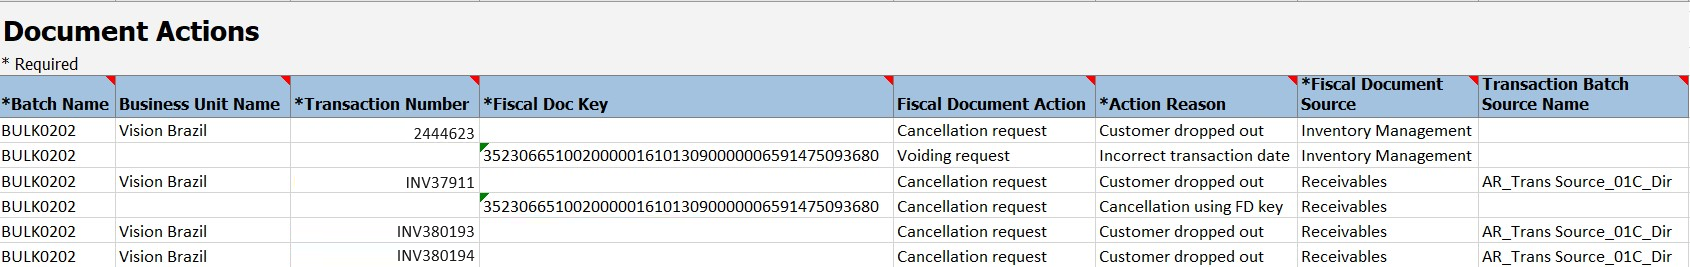 Image shows import document actions FBDI template example.